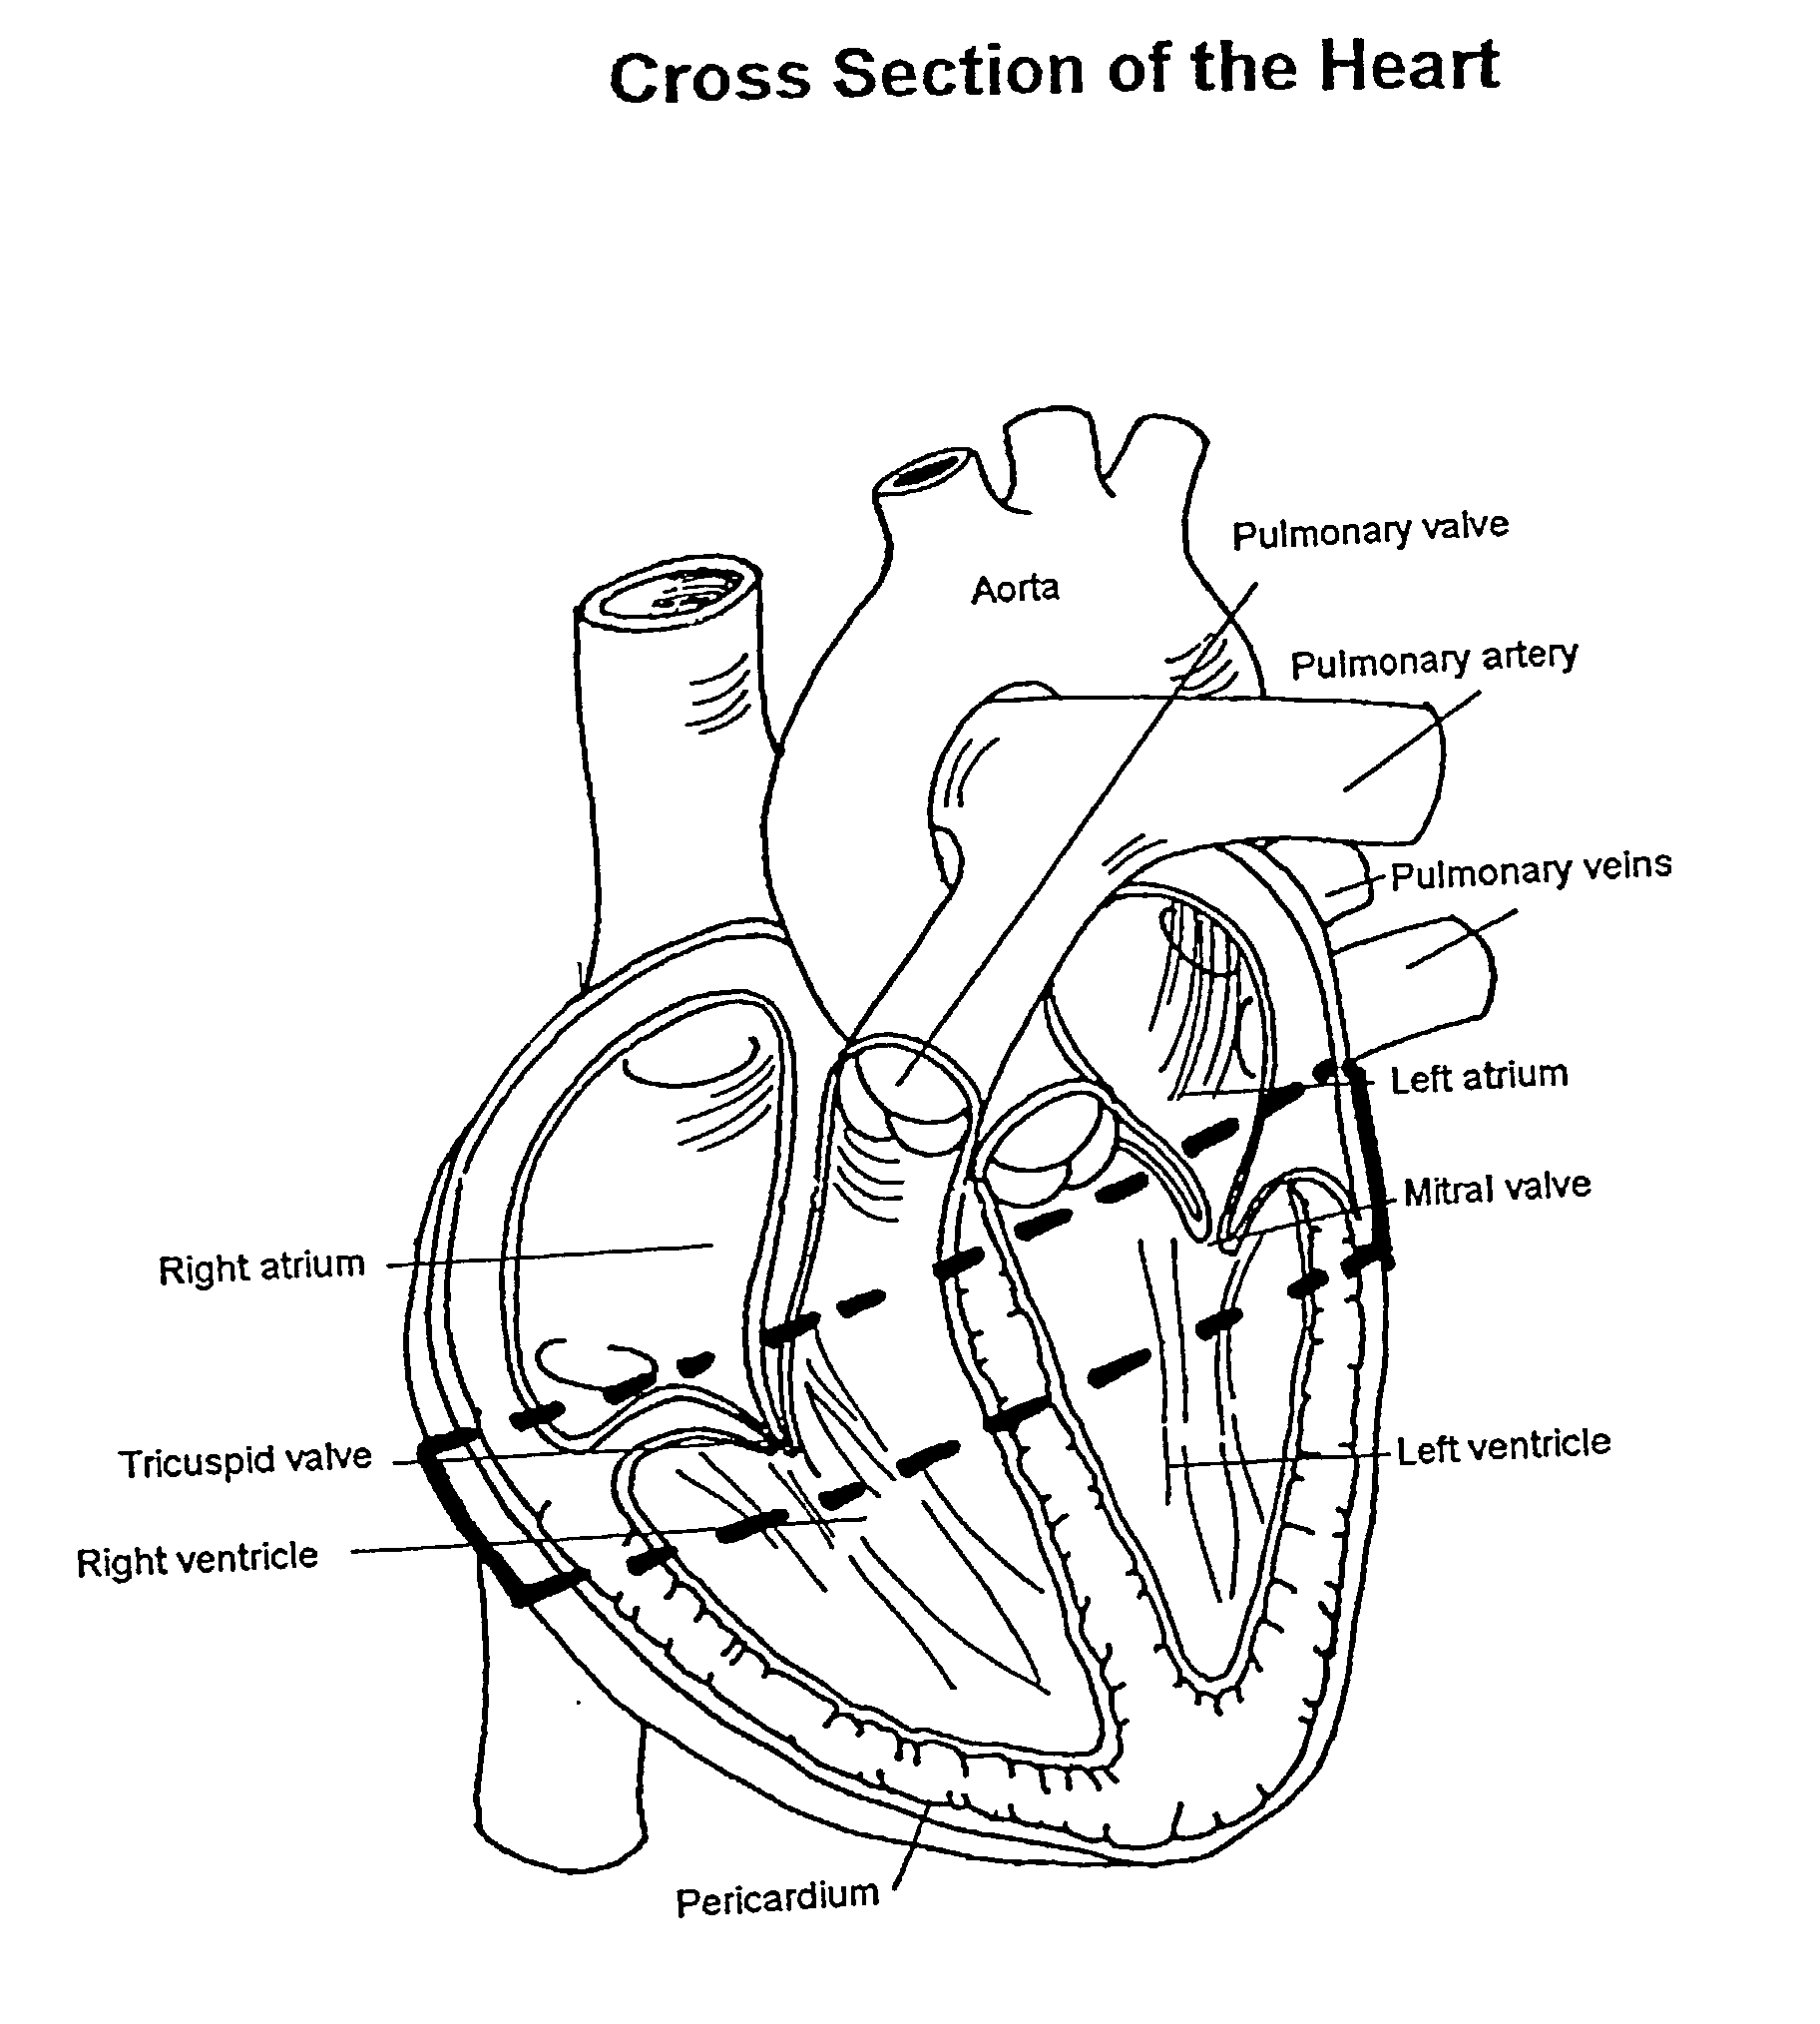 Method and apparatus for external stabilization of the heart